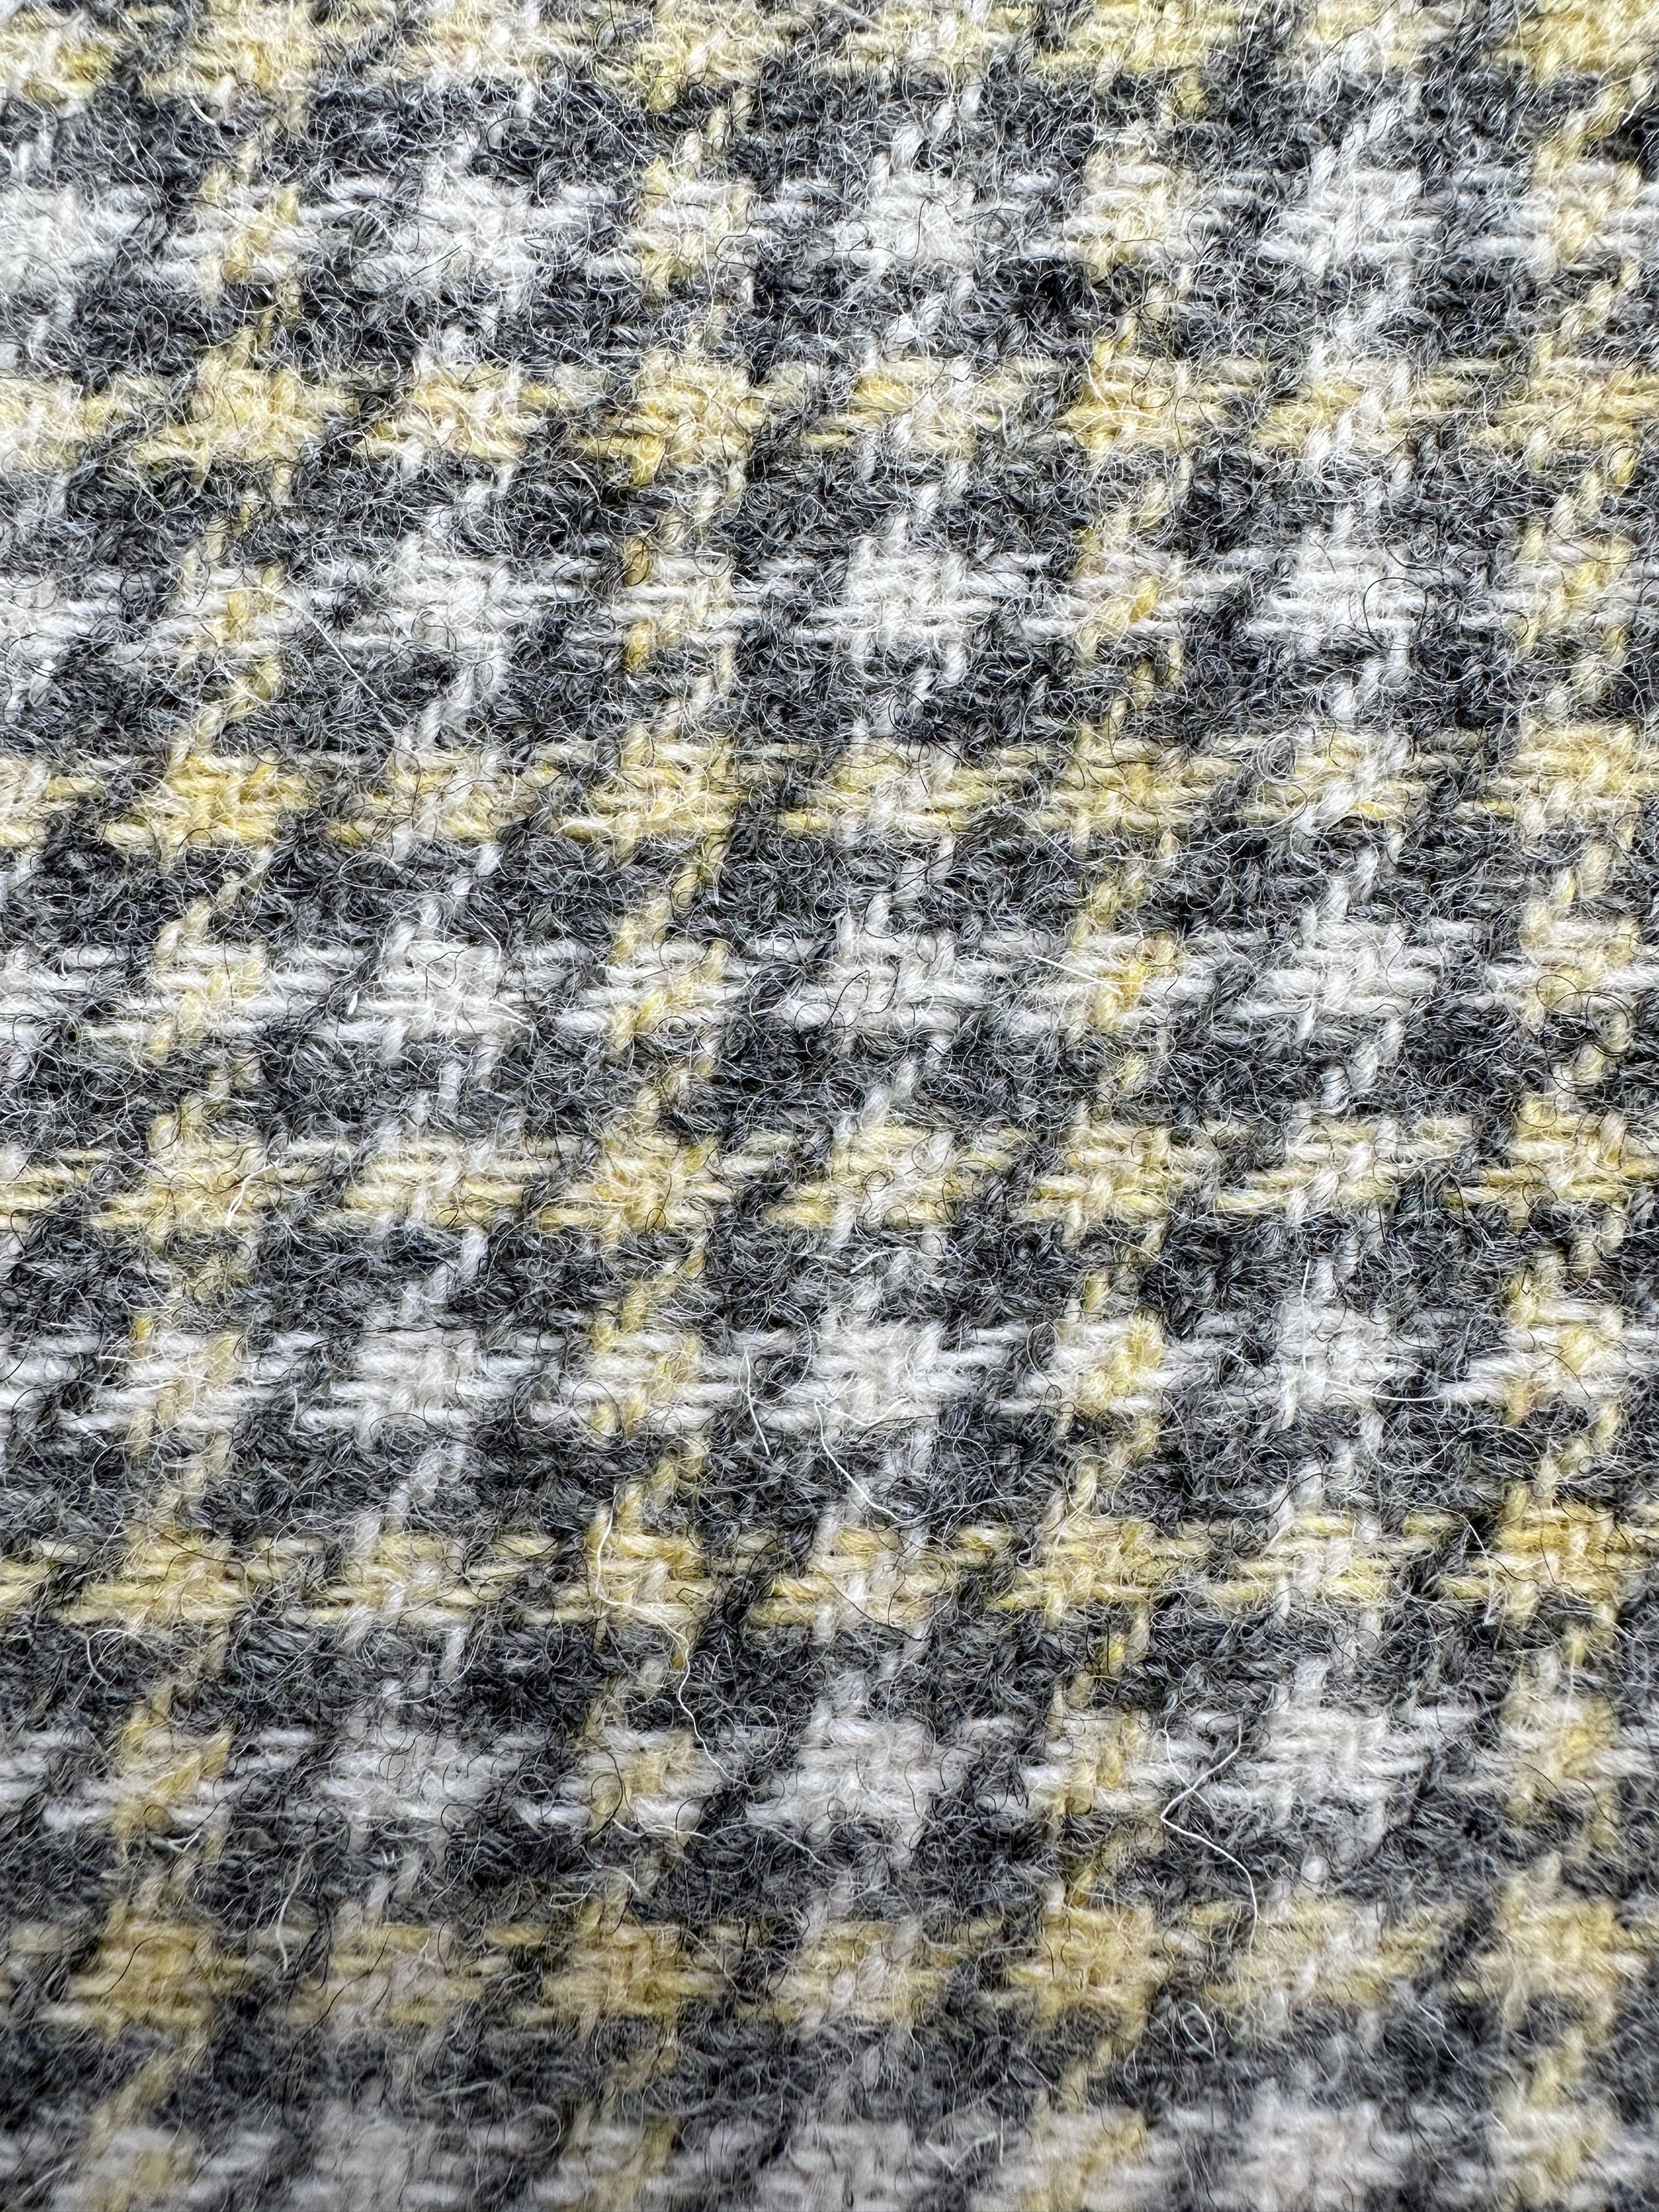 A detailed view of a tight, uniform weave in a checkered tweed fabric